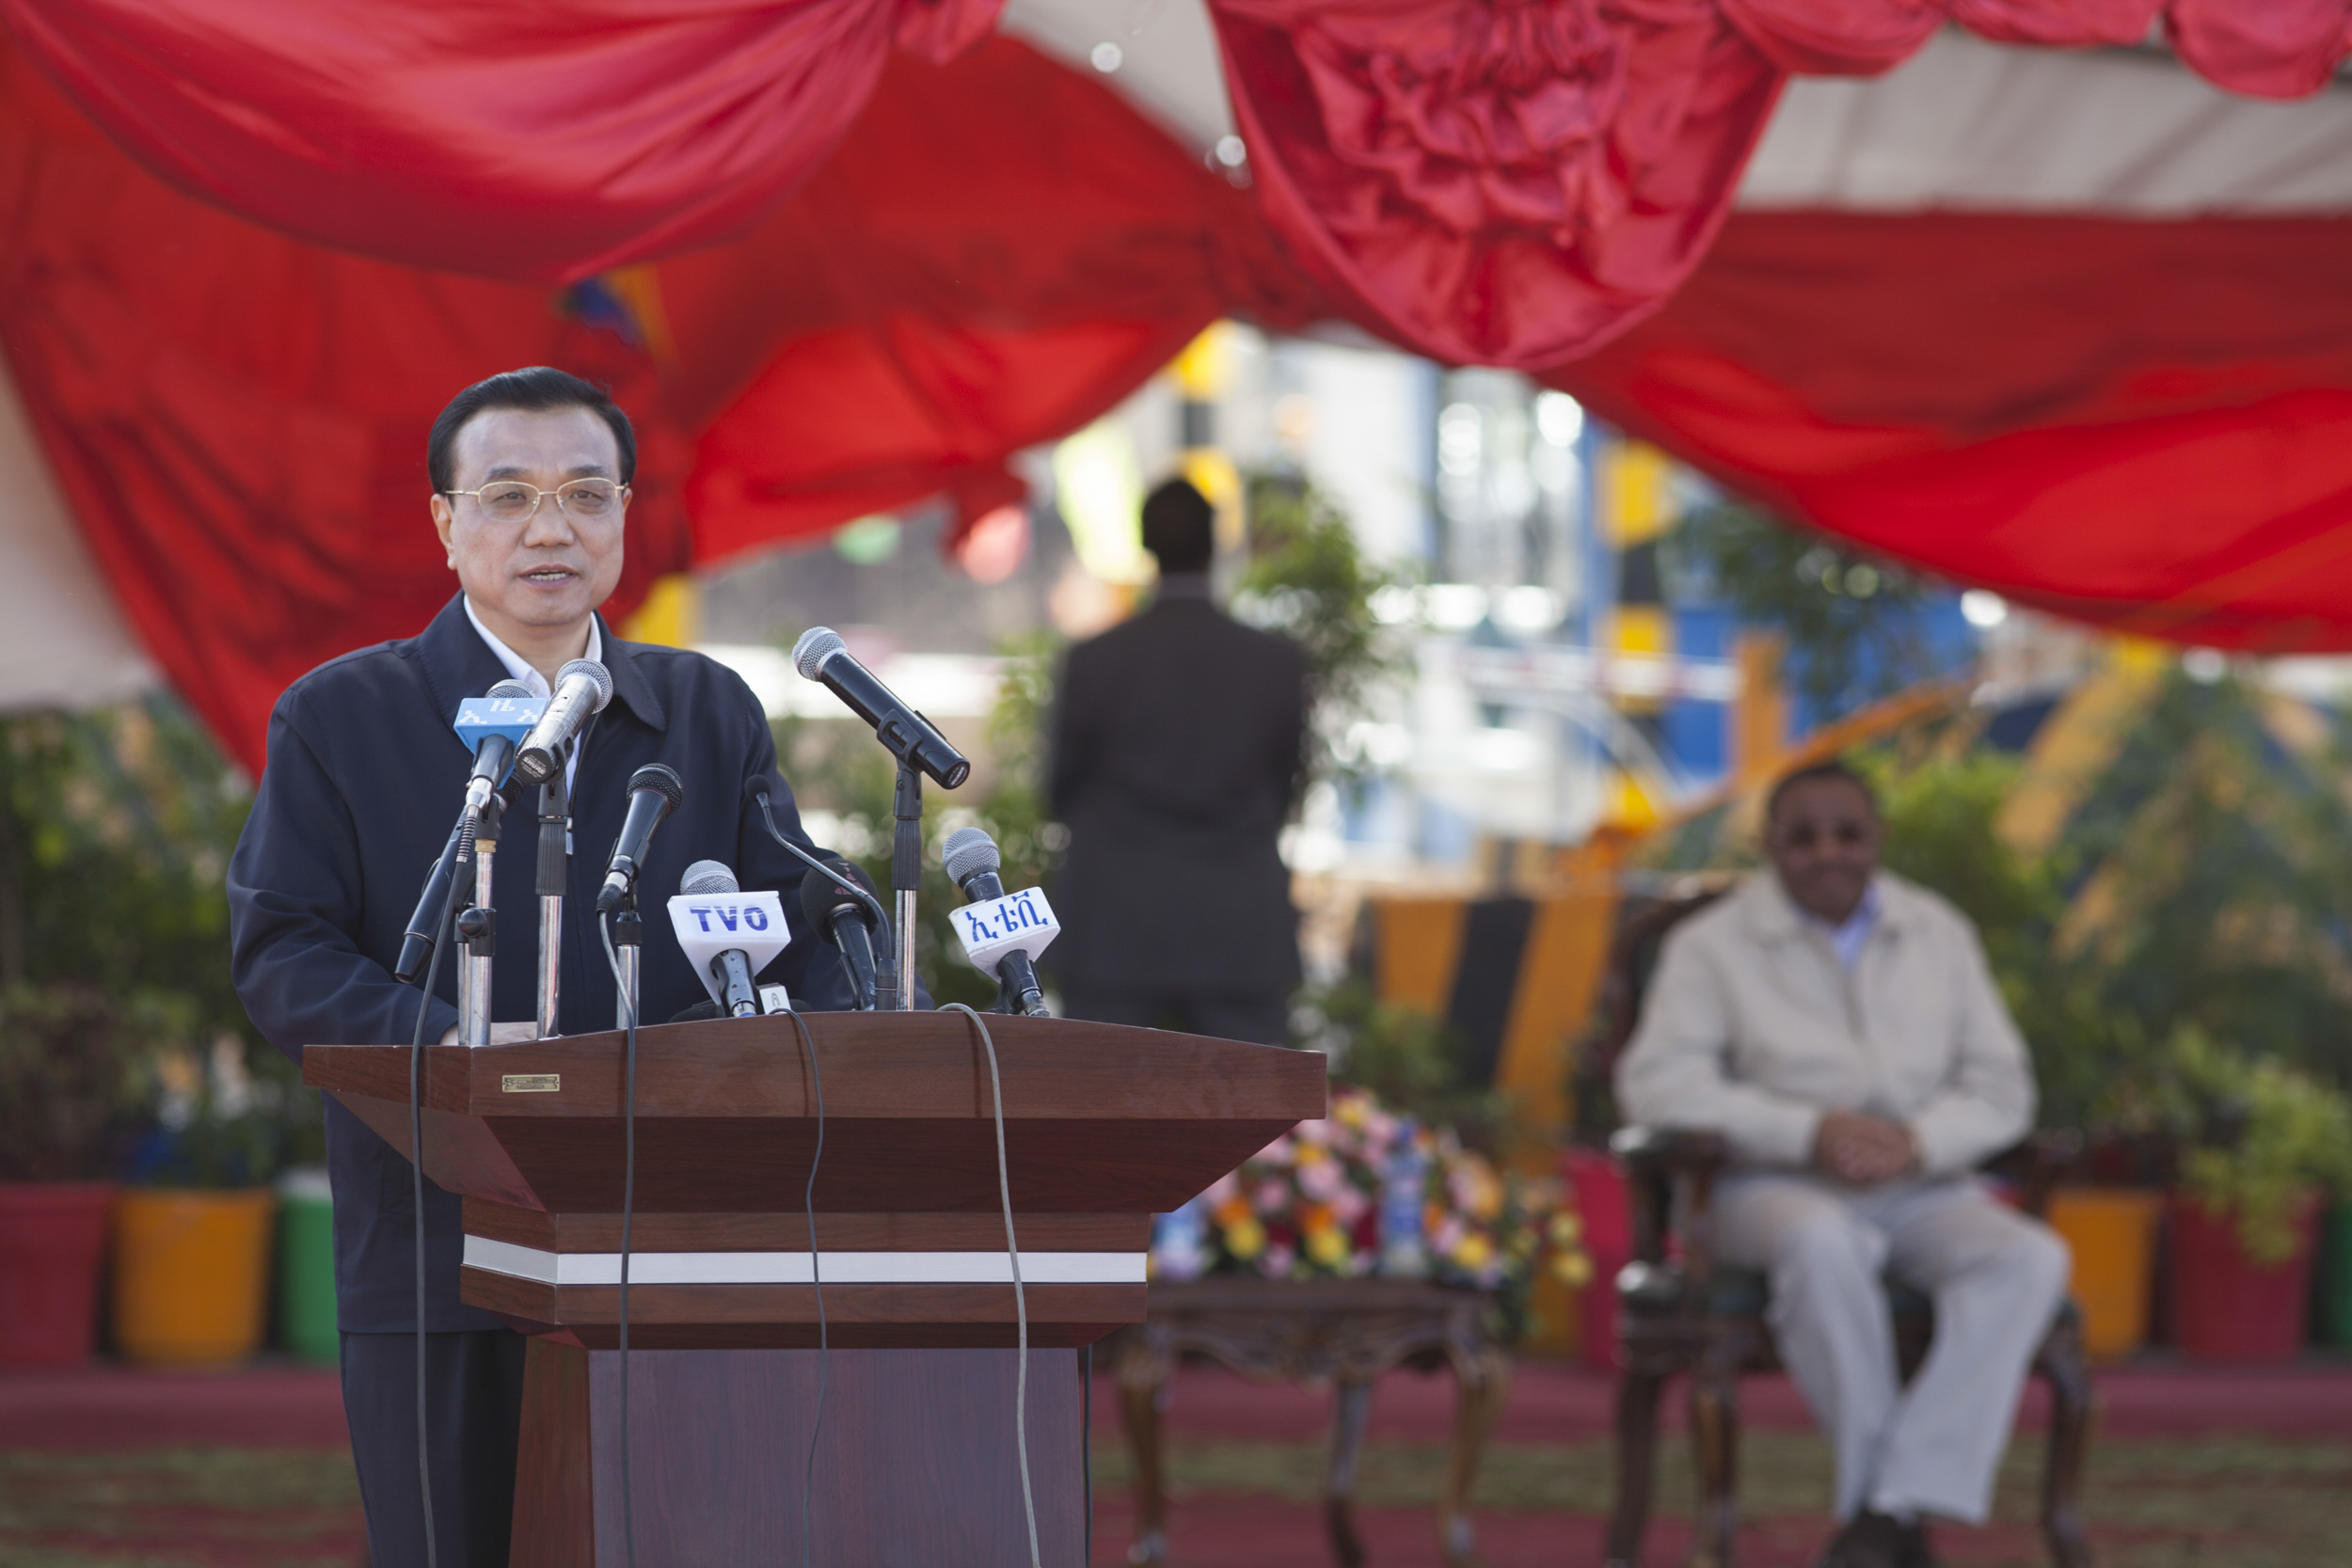   Li Keqiang, Chinese Prime Minister Li Keqiang gives a speech at the site of the Addis Ababa Adama toll road on May 5, 2014, after he christened the site. Li arrived in Ethiopia for the start of a four-nation African tour, his first visit to the con